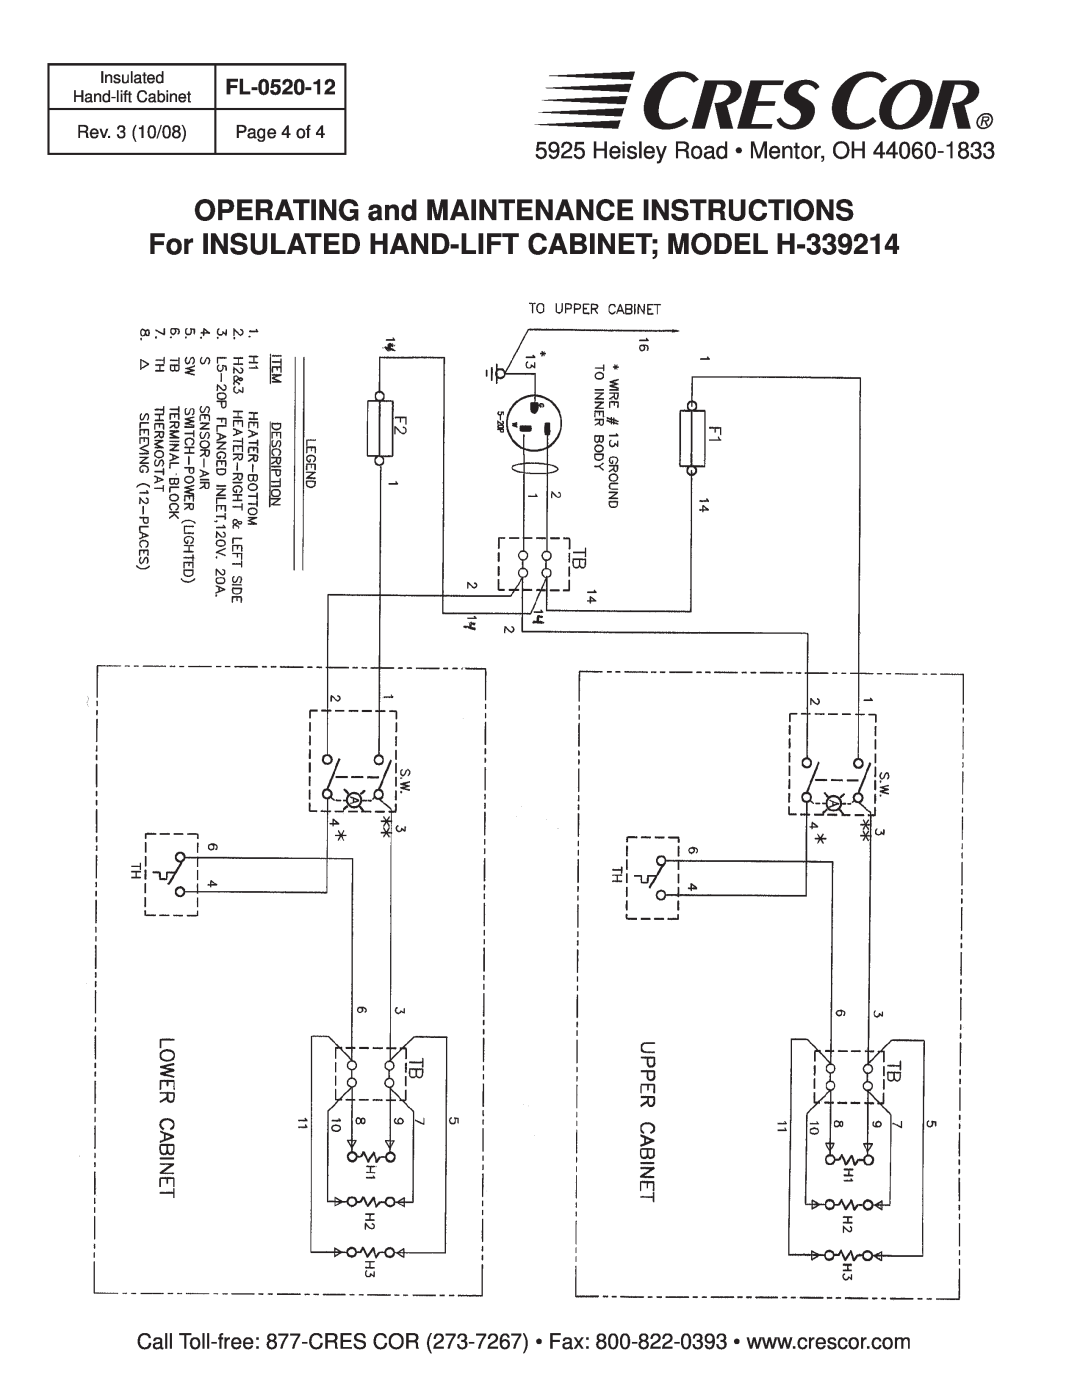 Cres Cor OPERATING and MAINTENANCE INSTRUCTIONS, For INSULATED HAND-LIFT CABINET MODEL H-339214, FL-0520-12, Insulated 